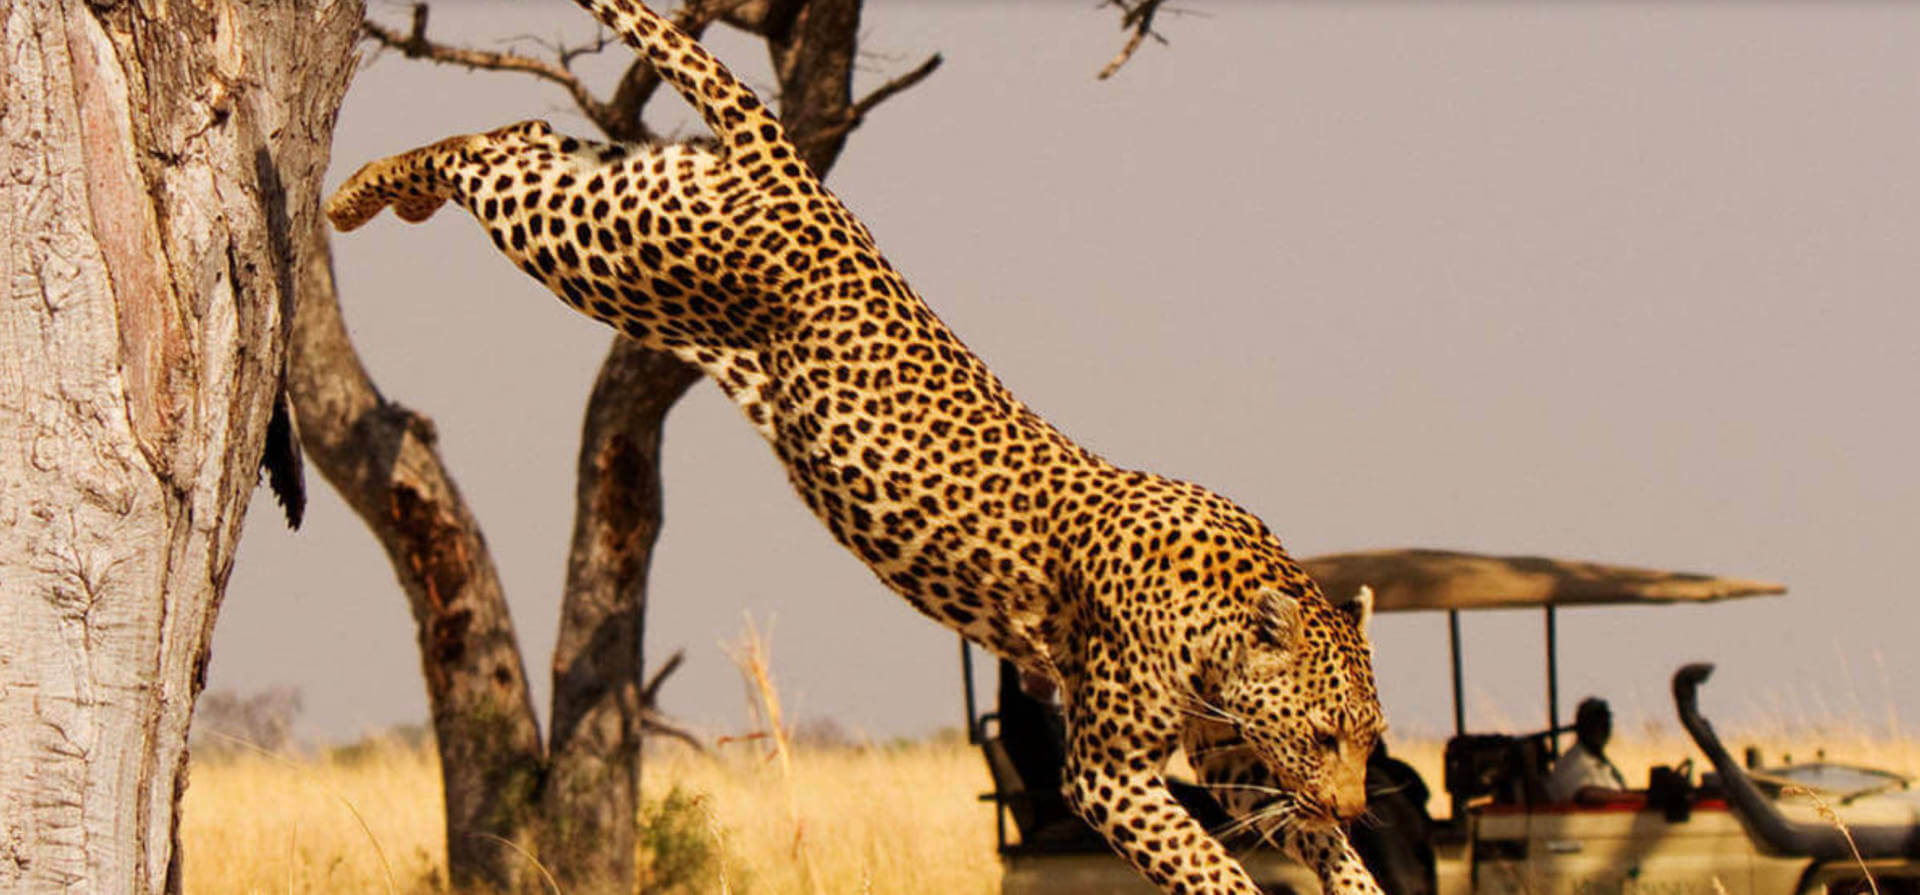 LUXURY SAFARI MAGAZINE FORMS AN EXCITING NEW ALLIANCE WITH AFRICA'S EDEN 